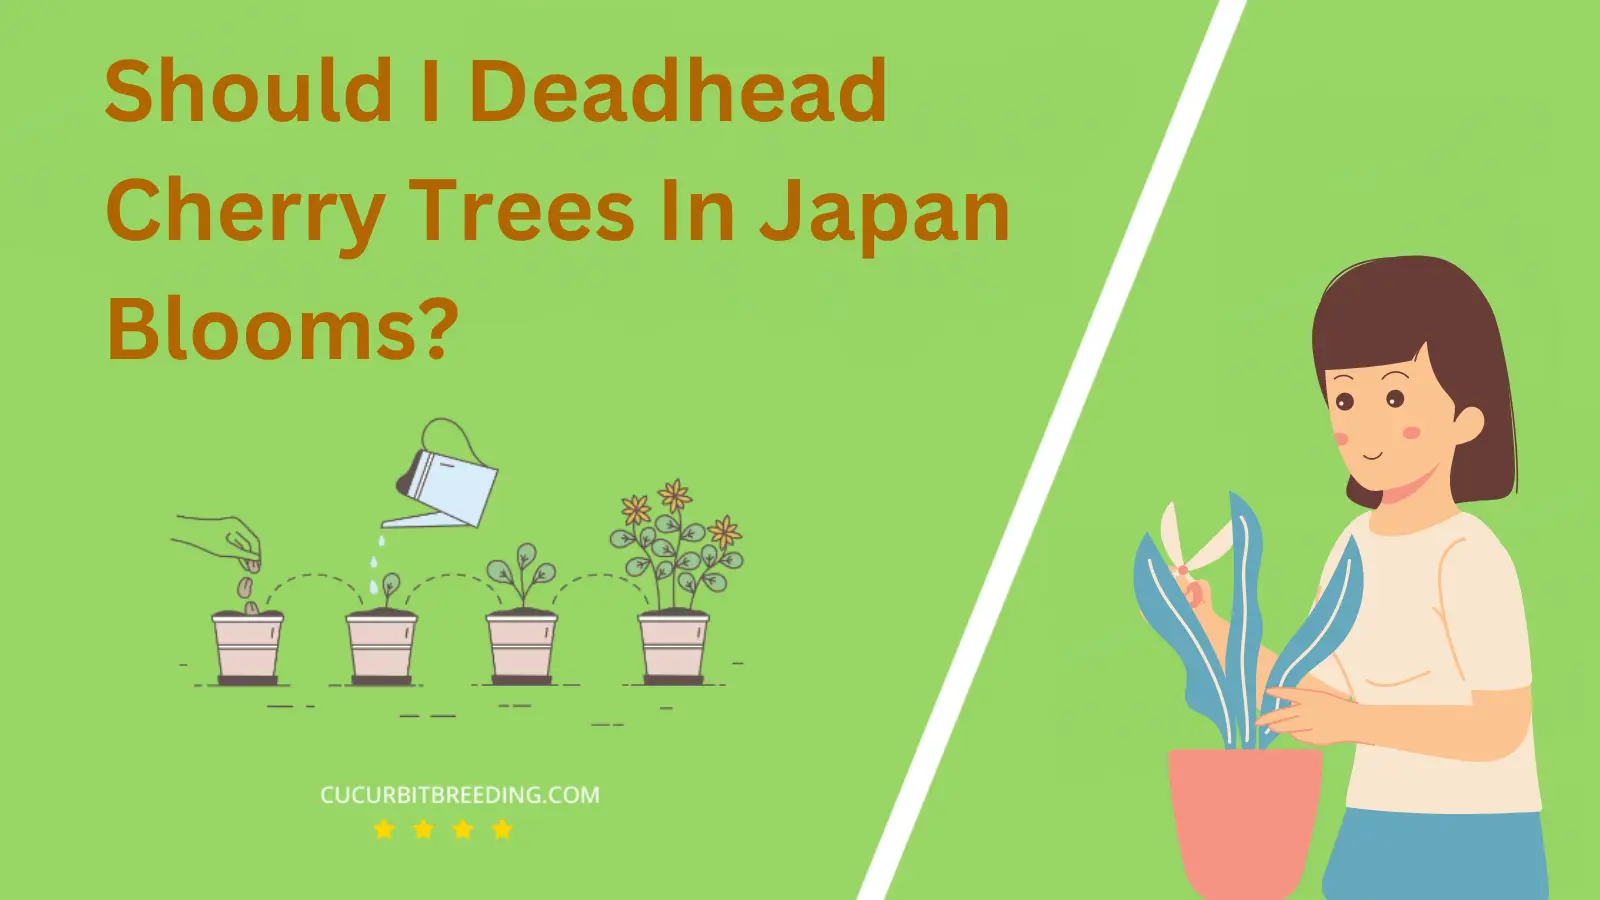 Should I Deadhead Cherry Trees In Japan Blooms?